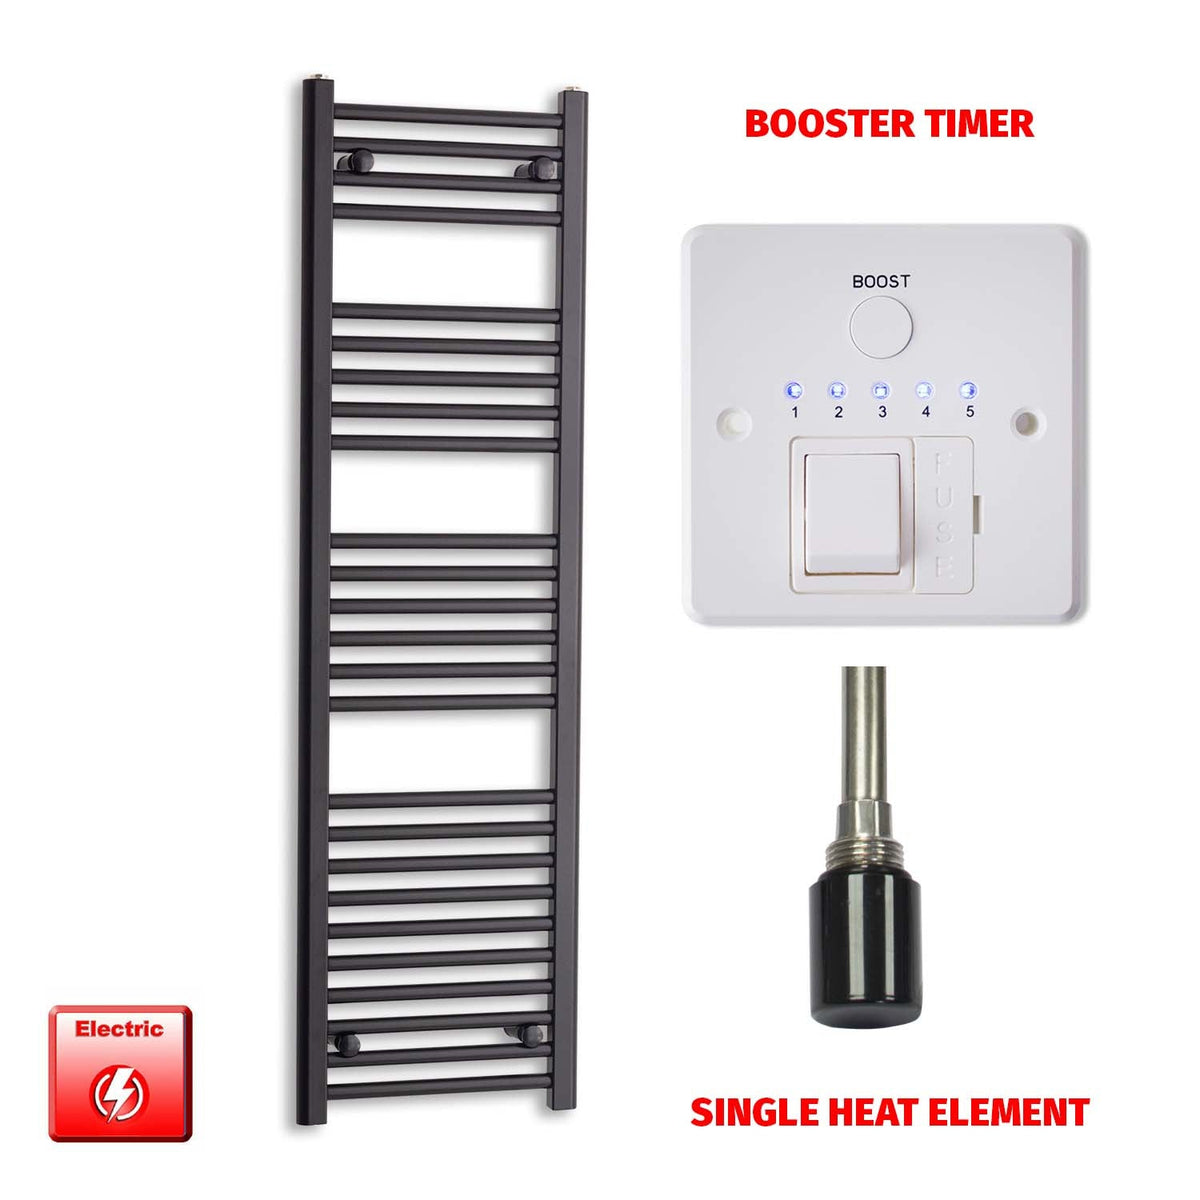 1400 x 400 Flat Black Pre-Filled Electric Heated Towel Radiator HTR Booster Timer